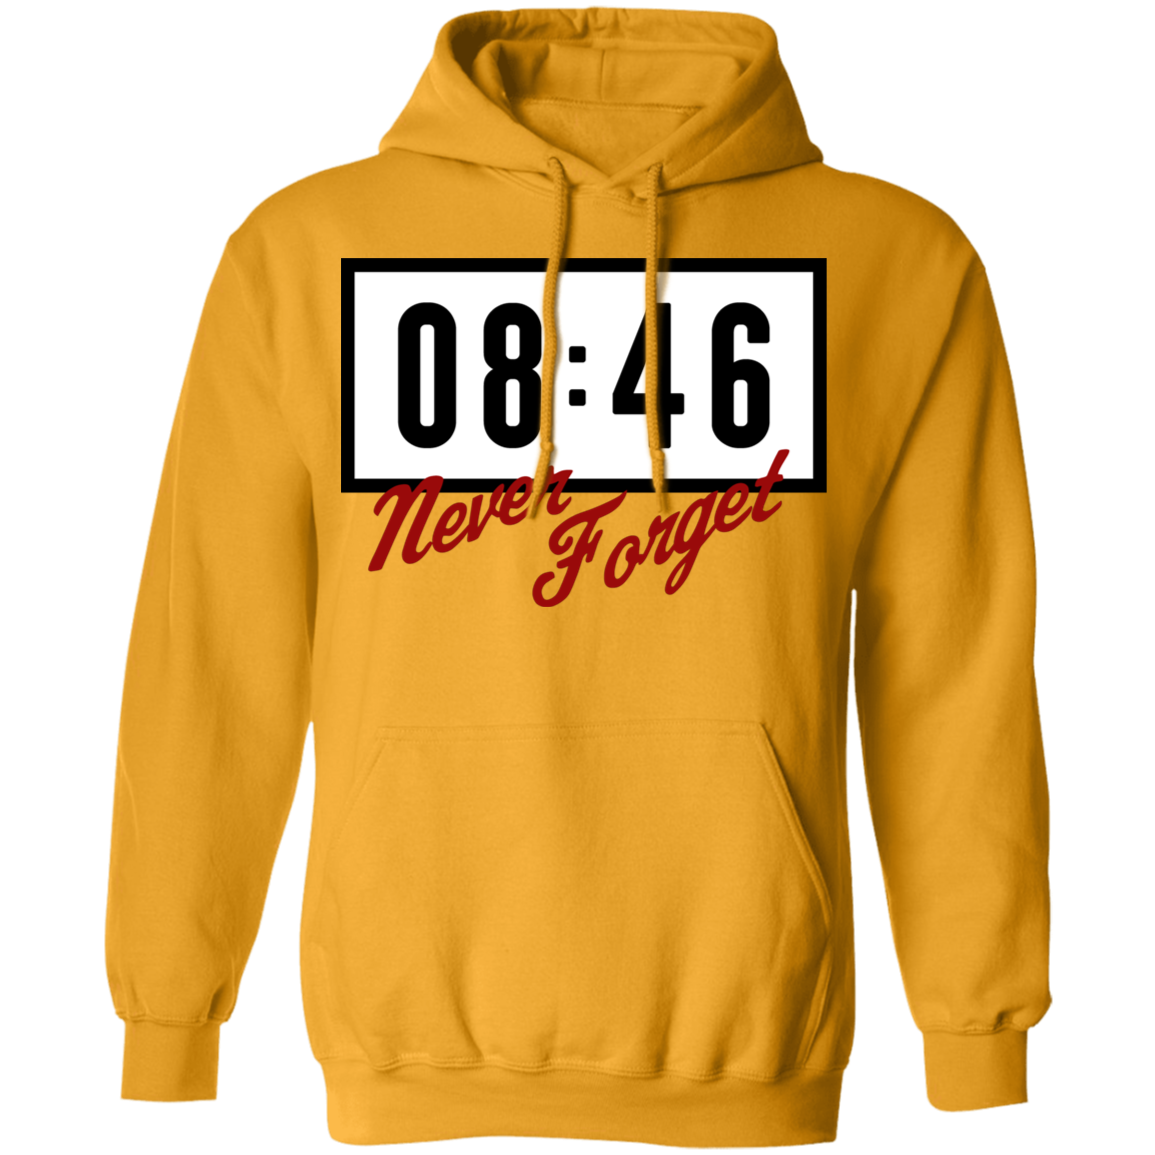 Z66 Pullover Hoodie-unsex